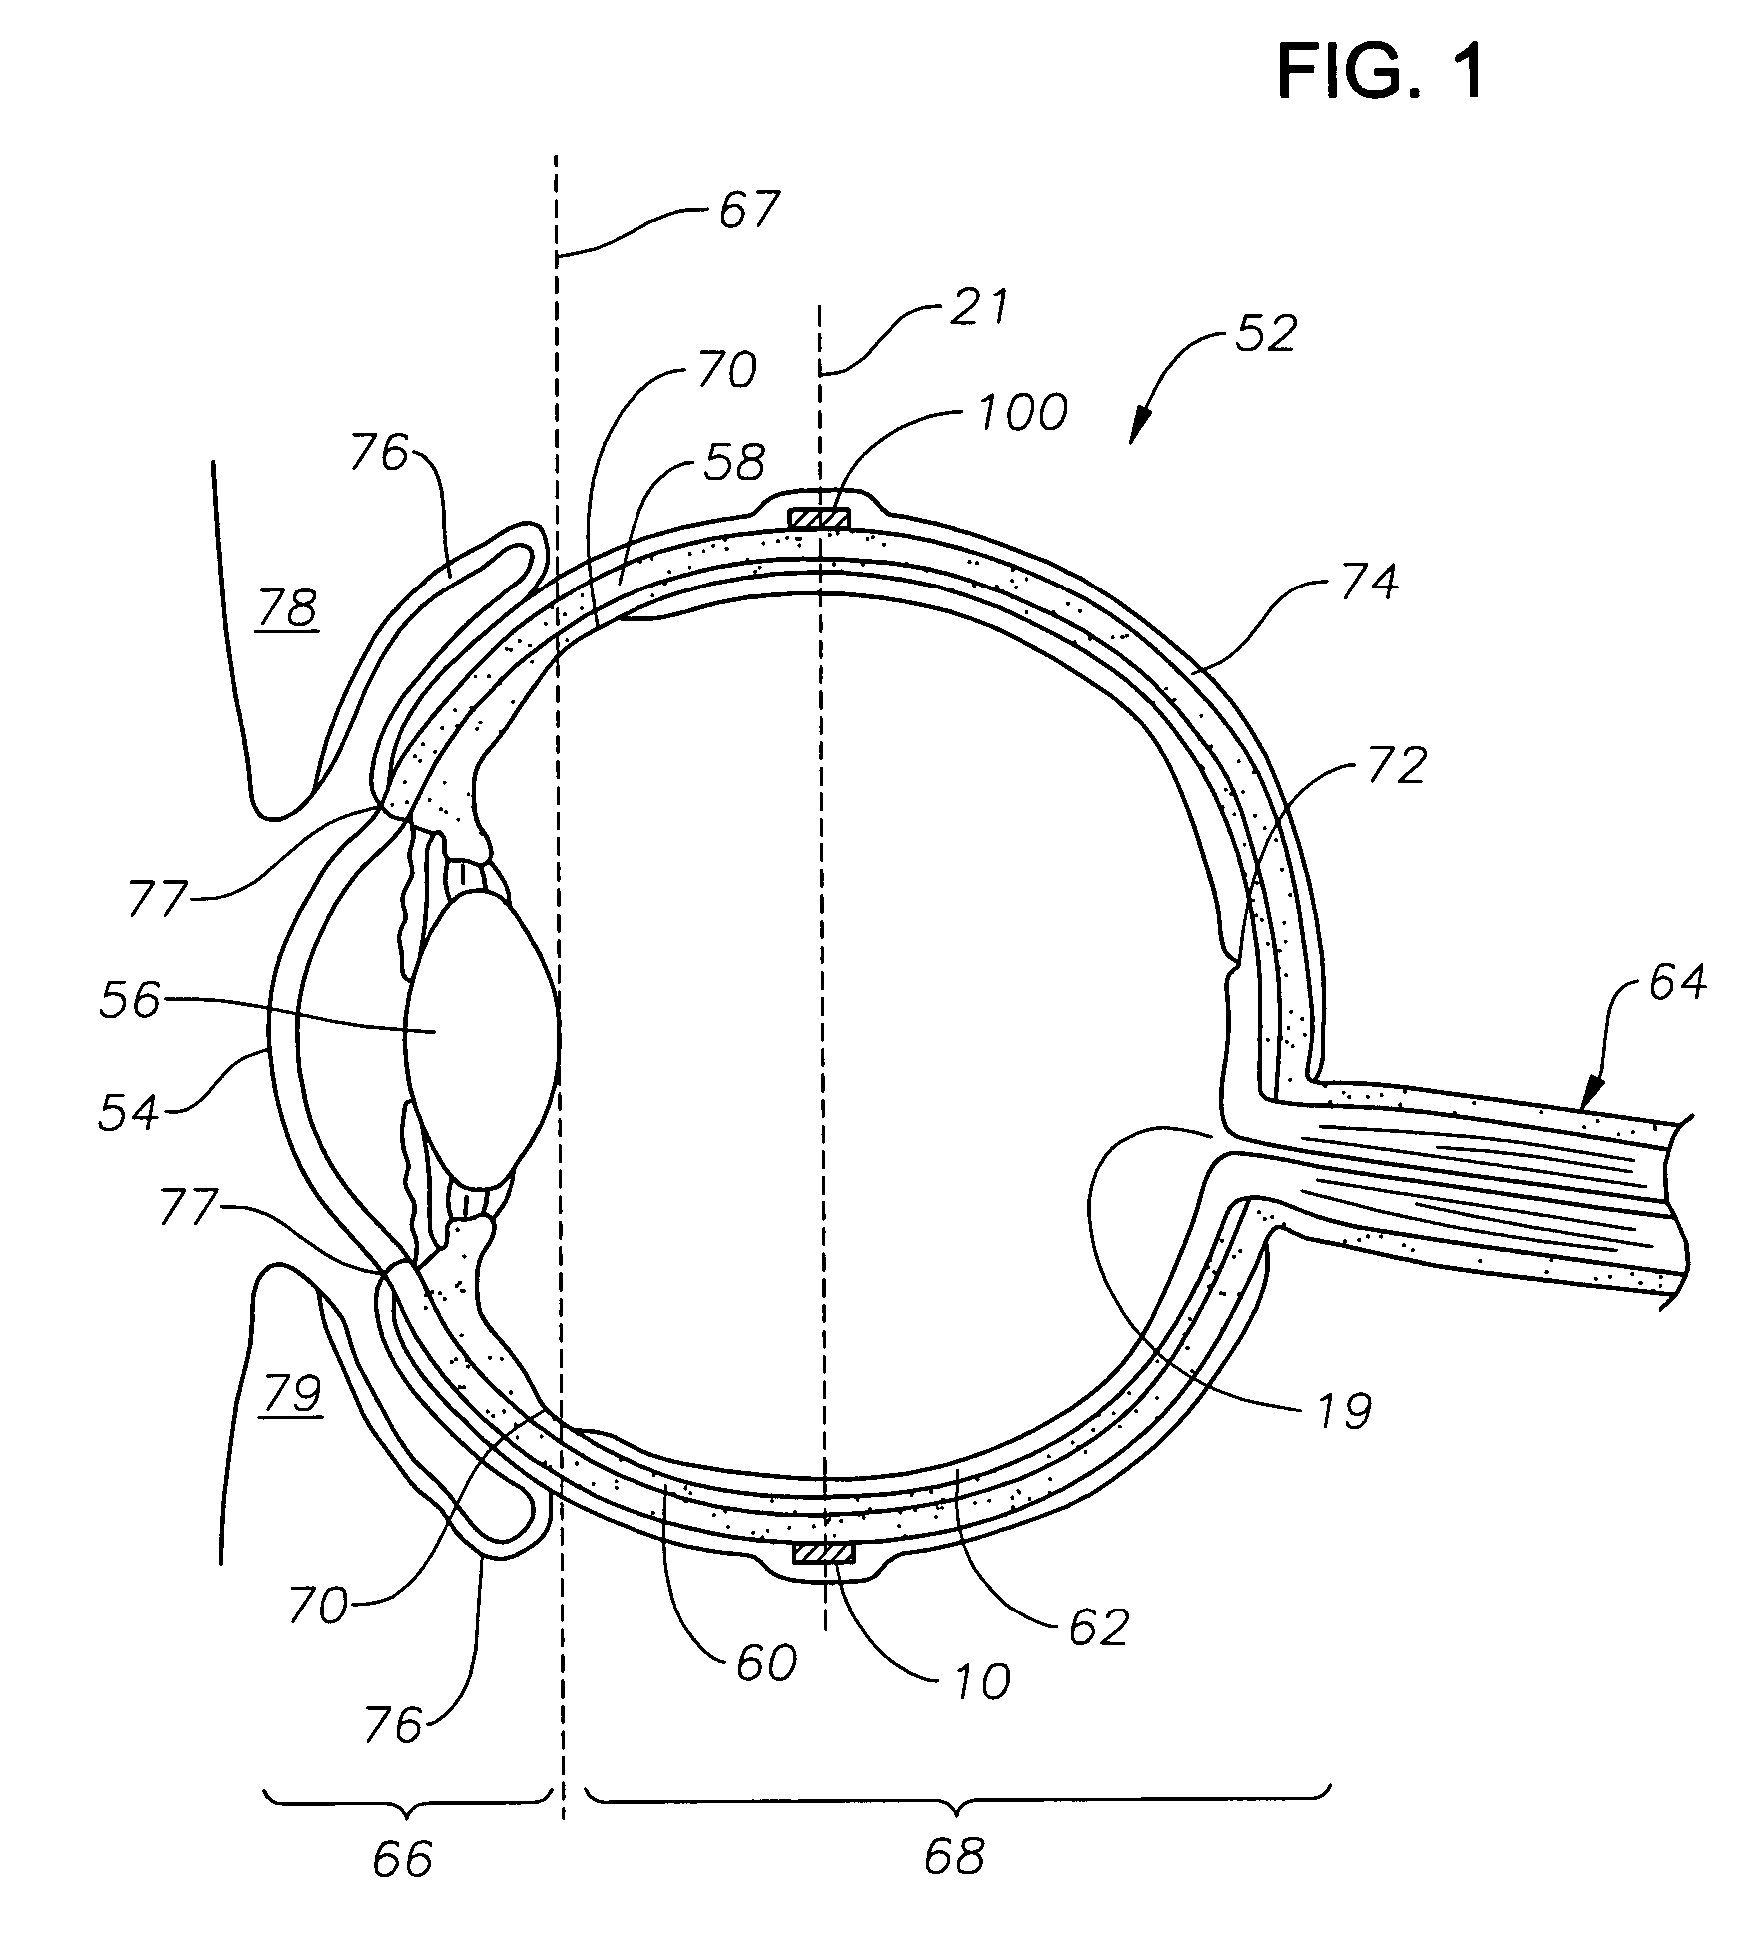 Ophthalmic drug delivery device